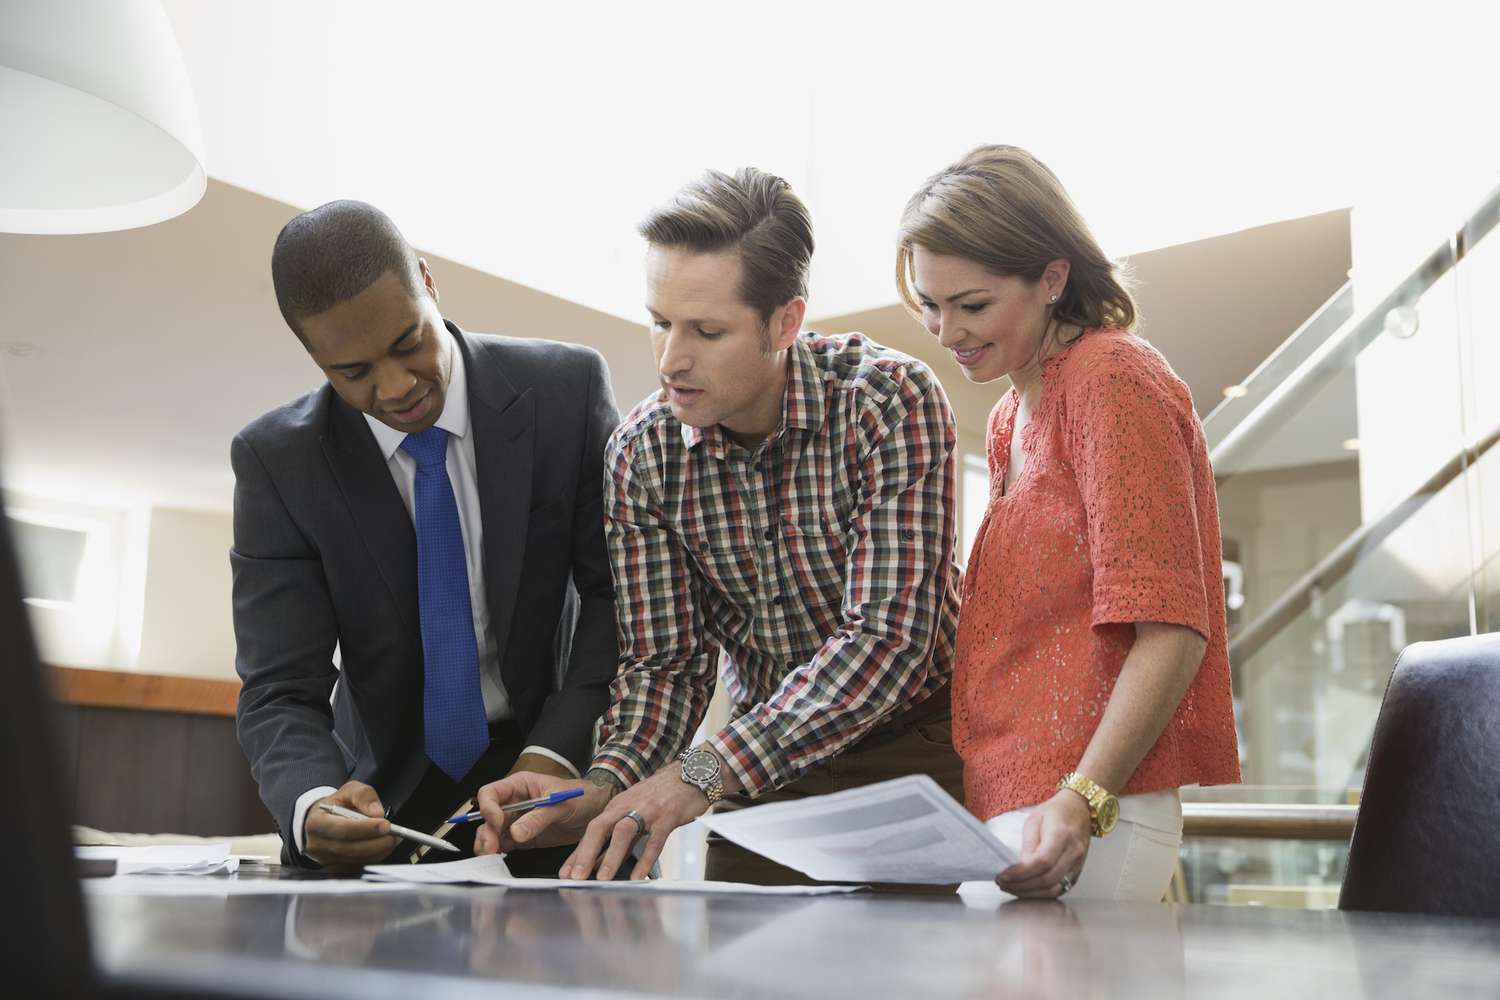 Couple gathered with an investment advisor looking at paperwork on a table